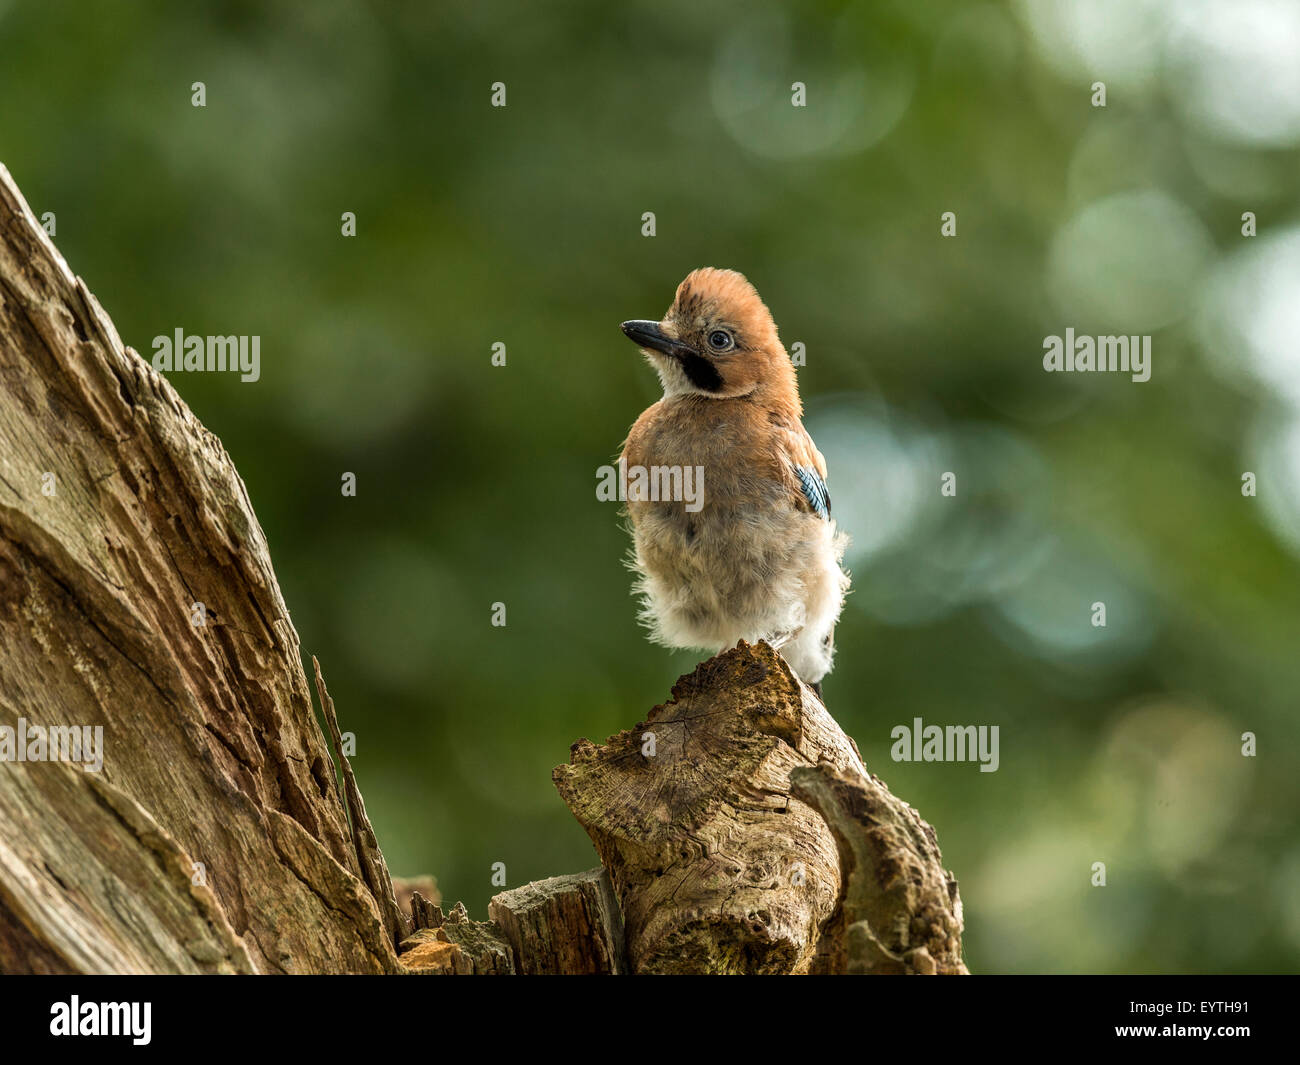 Juvenile Jay depicted perched on an old dilapidated wooden tree stump. 'Isolated against an illuminated green forest background' Stock Photo